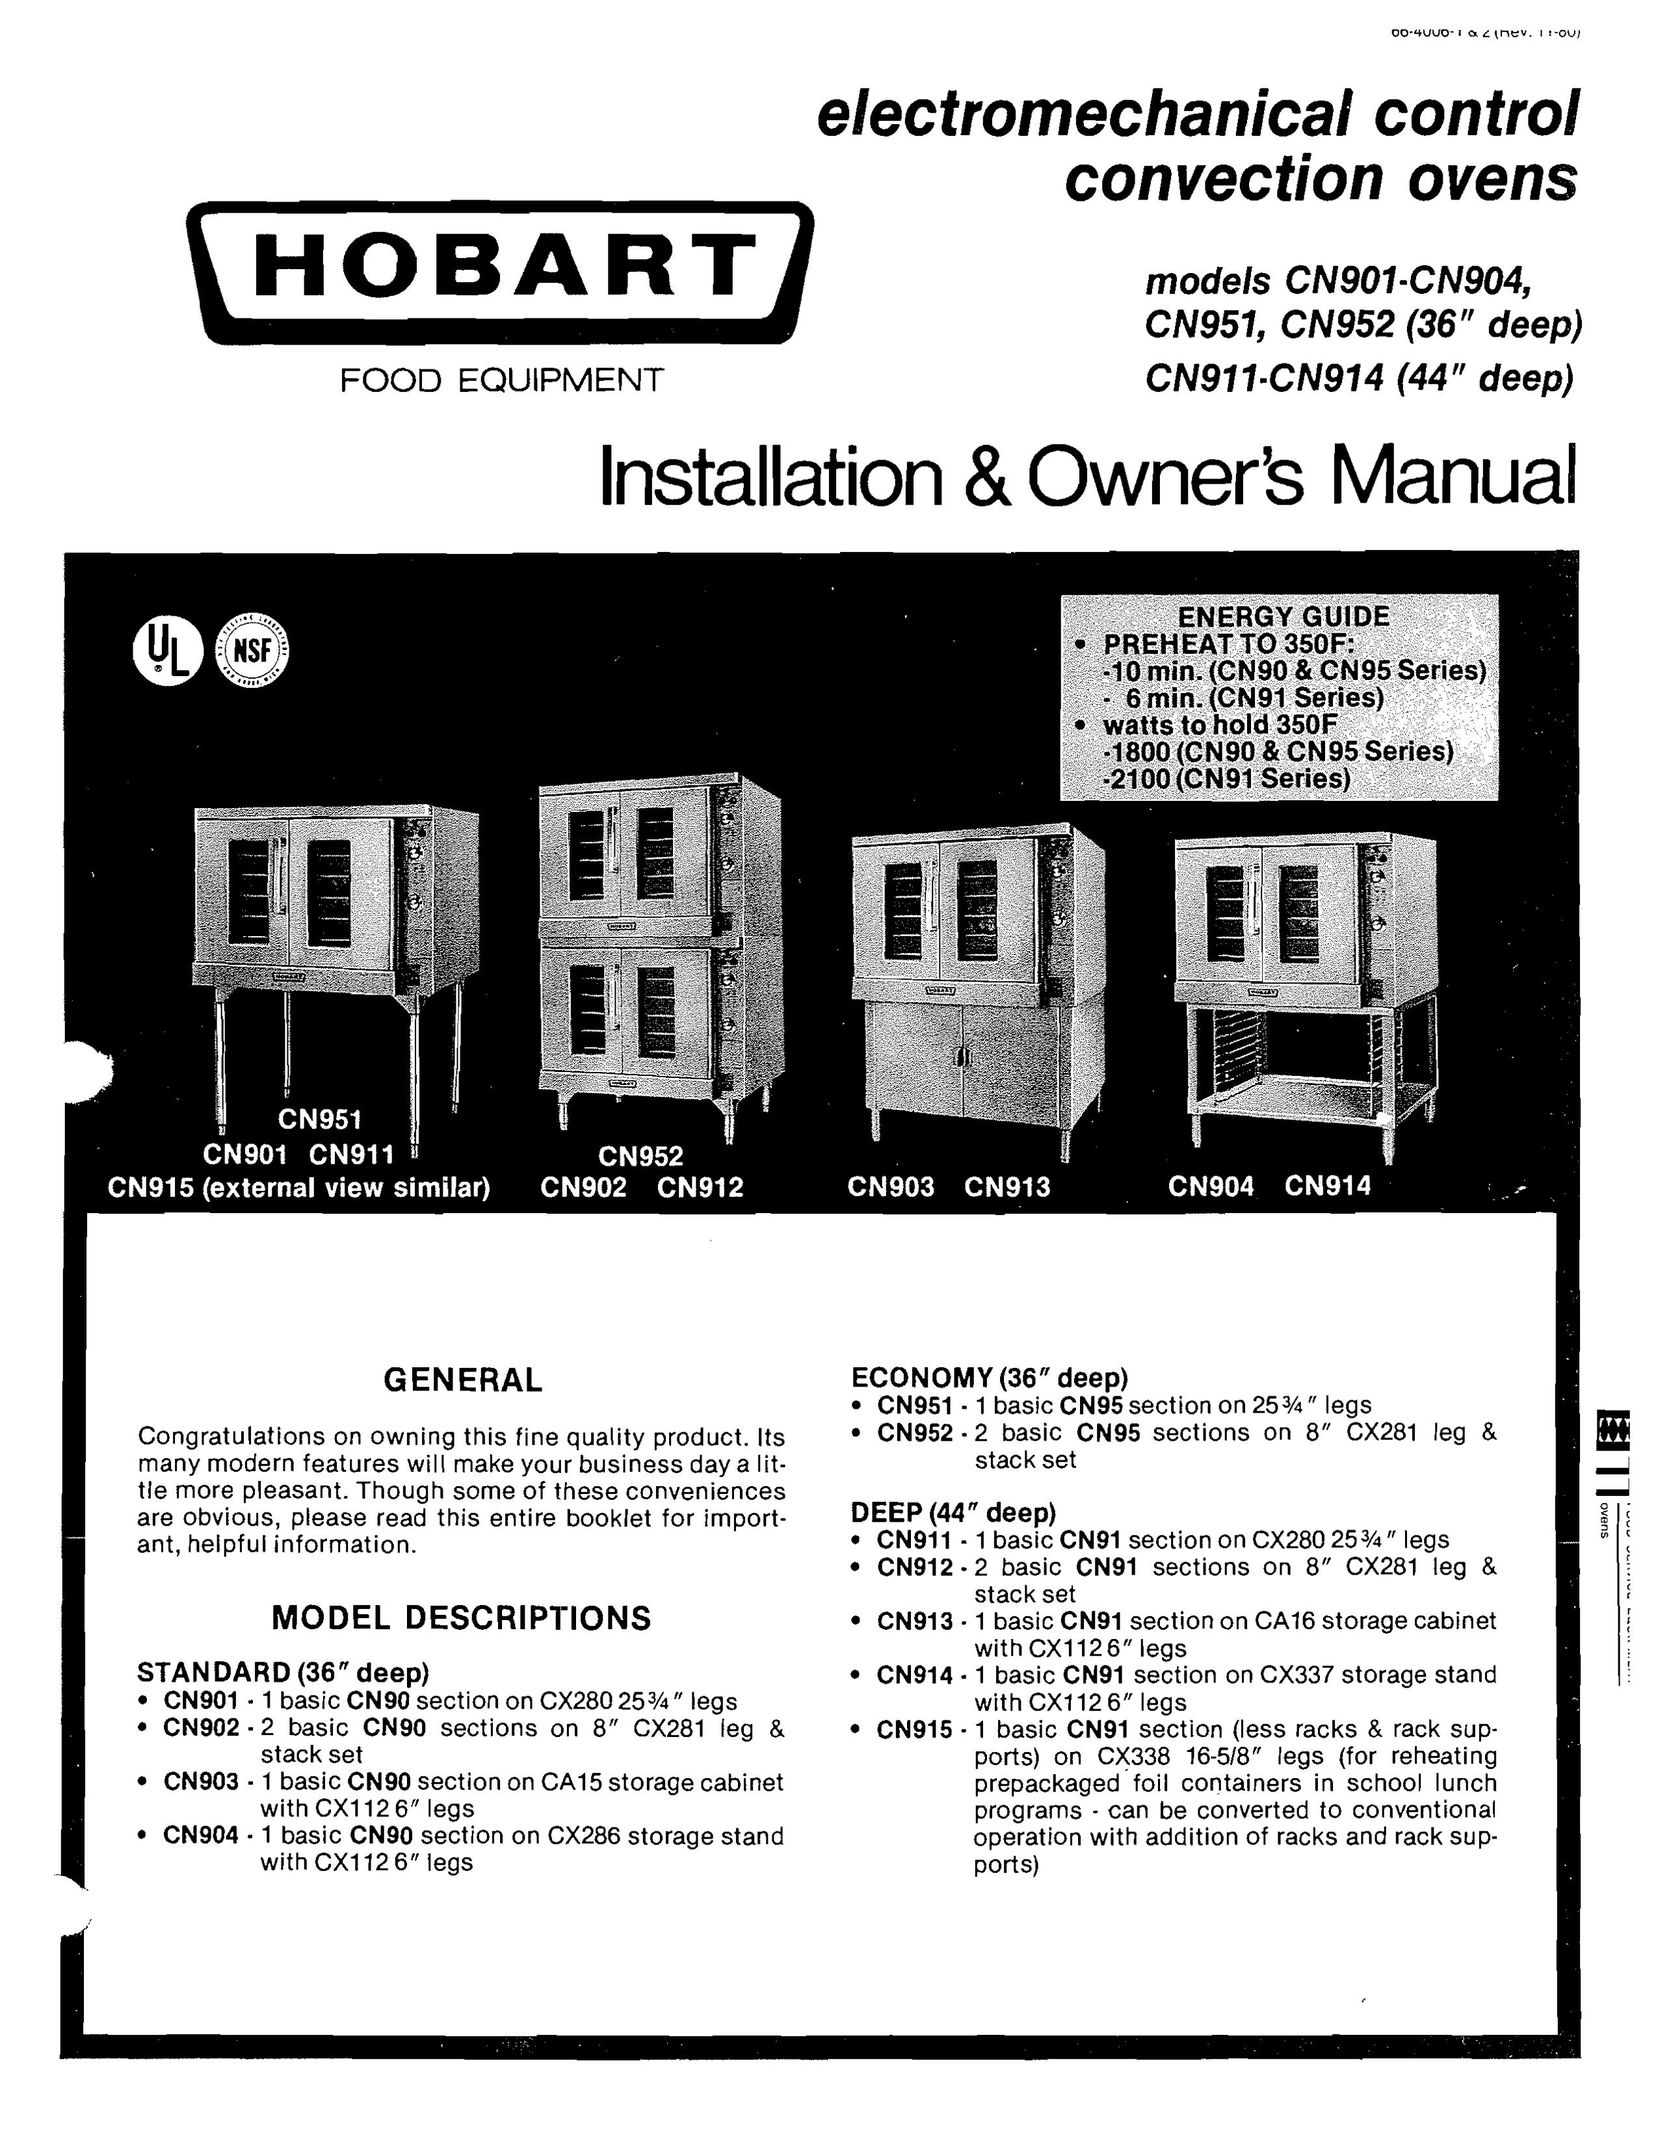 Hobart CN951 Convection Oven User Manual